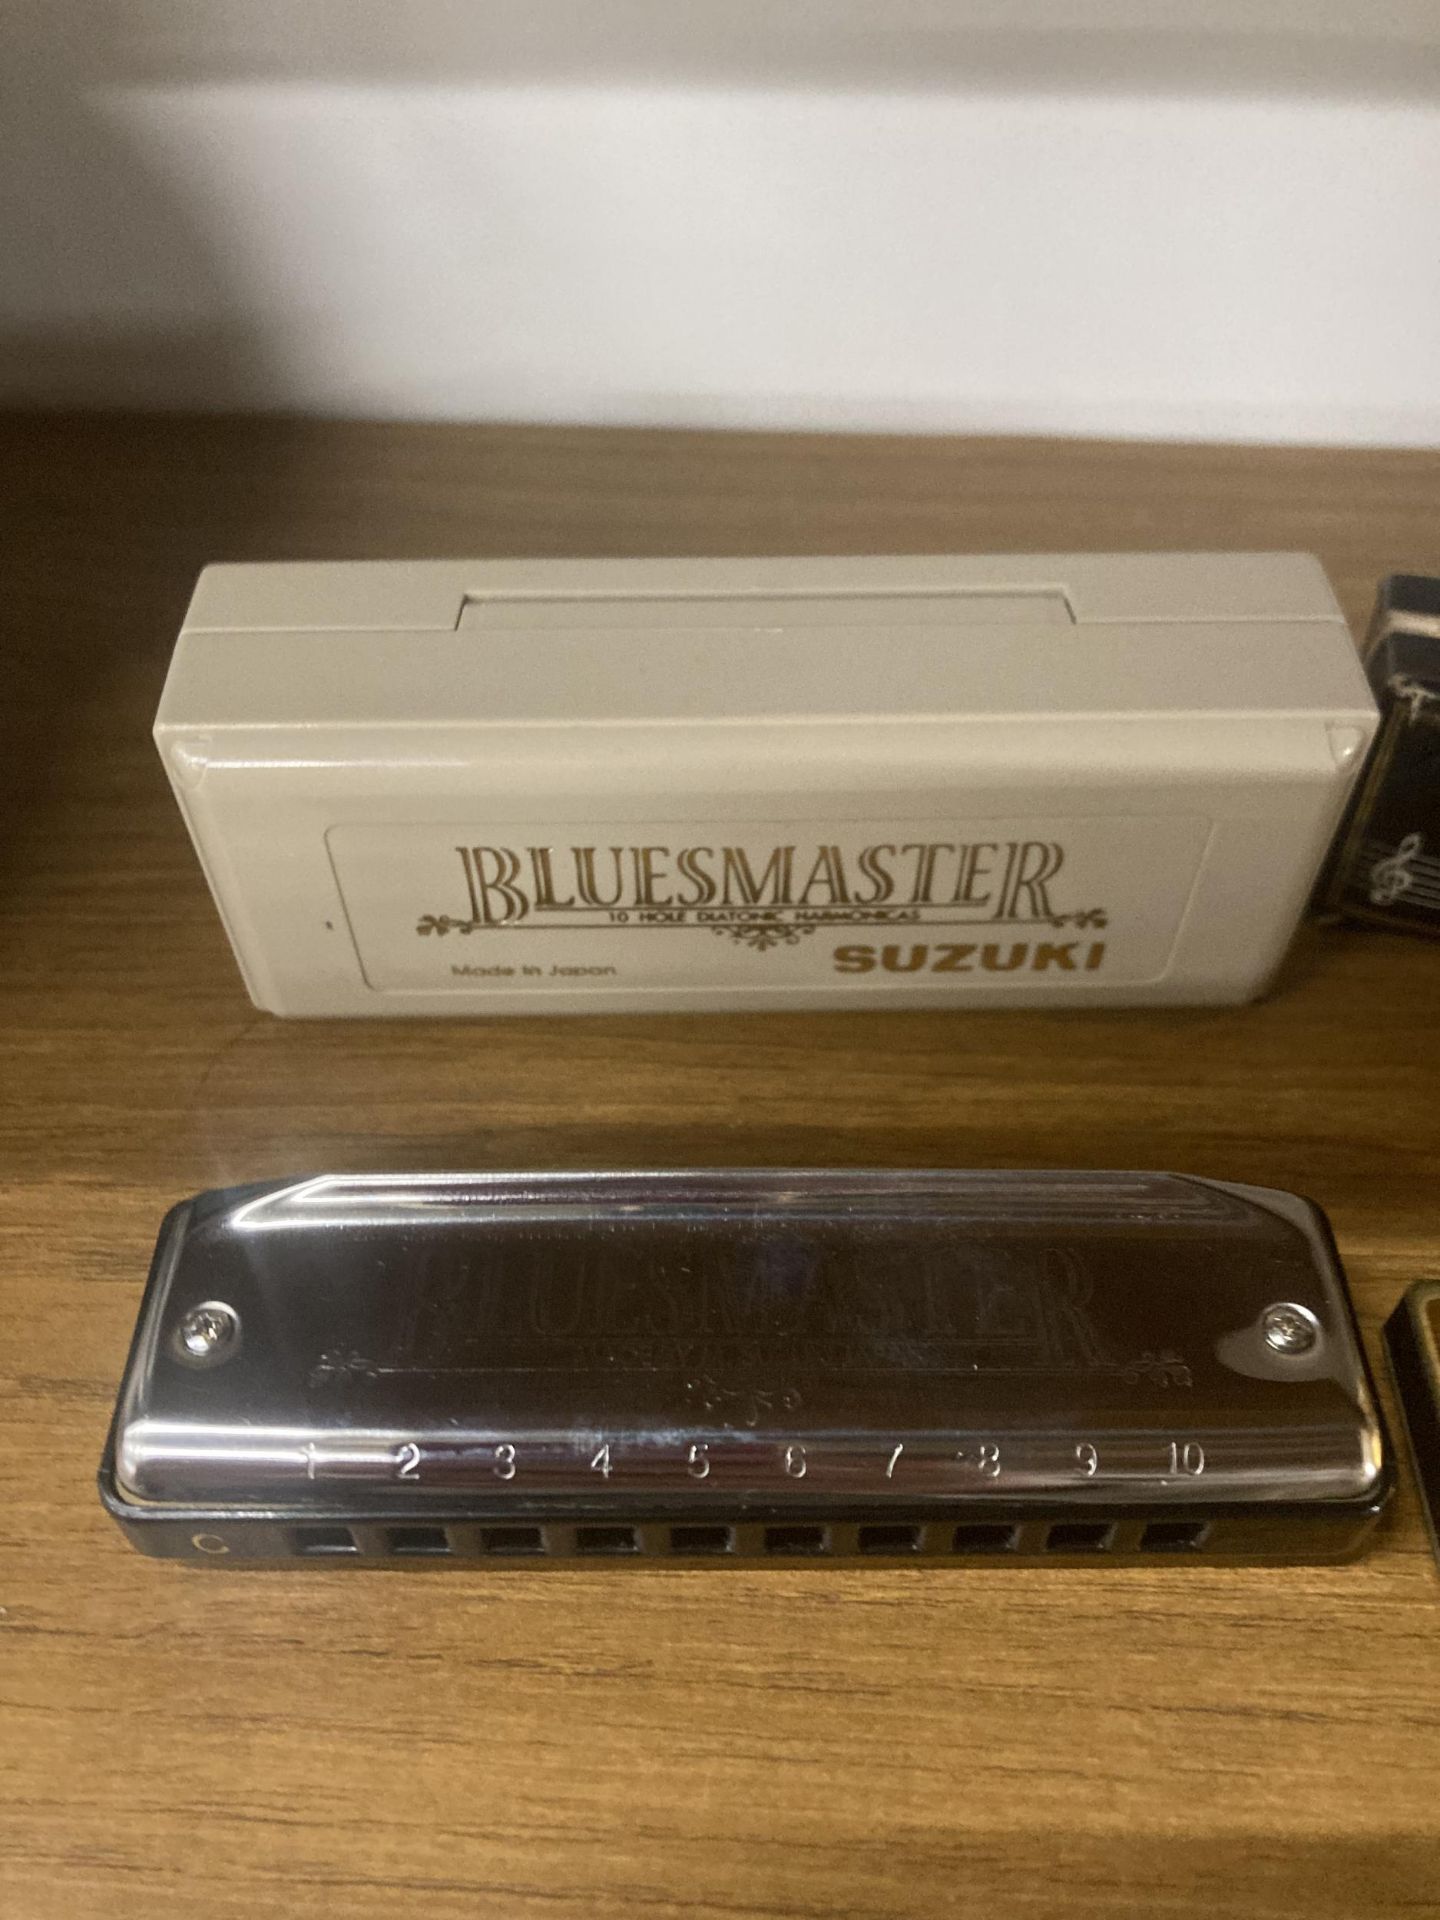 TWO HARMONICAS TO INCLUDE A SUZUKI BLUESMASTER IN KEY 'C' AND A FRONTIER HARP HARMONICA GOLD - Image 2 of 3